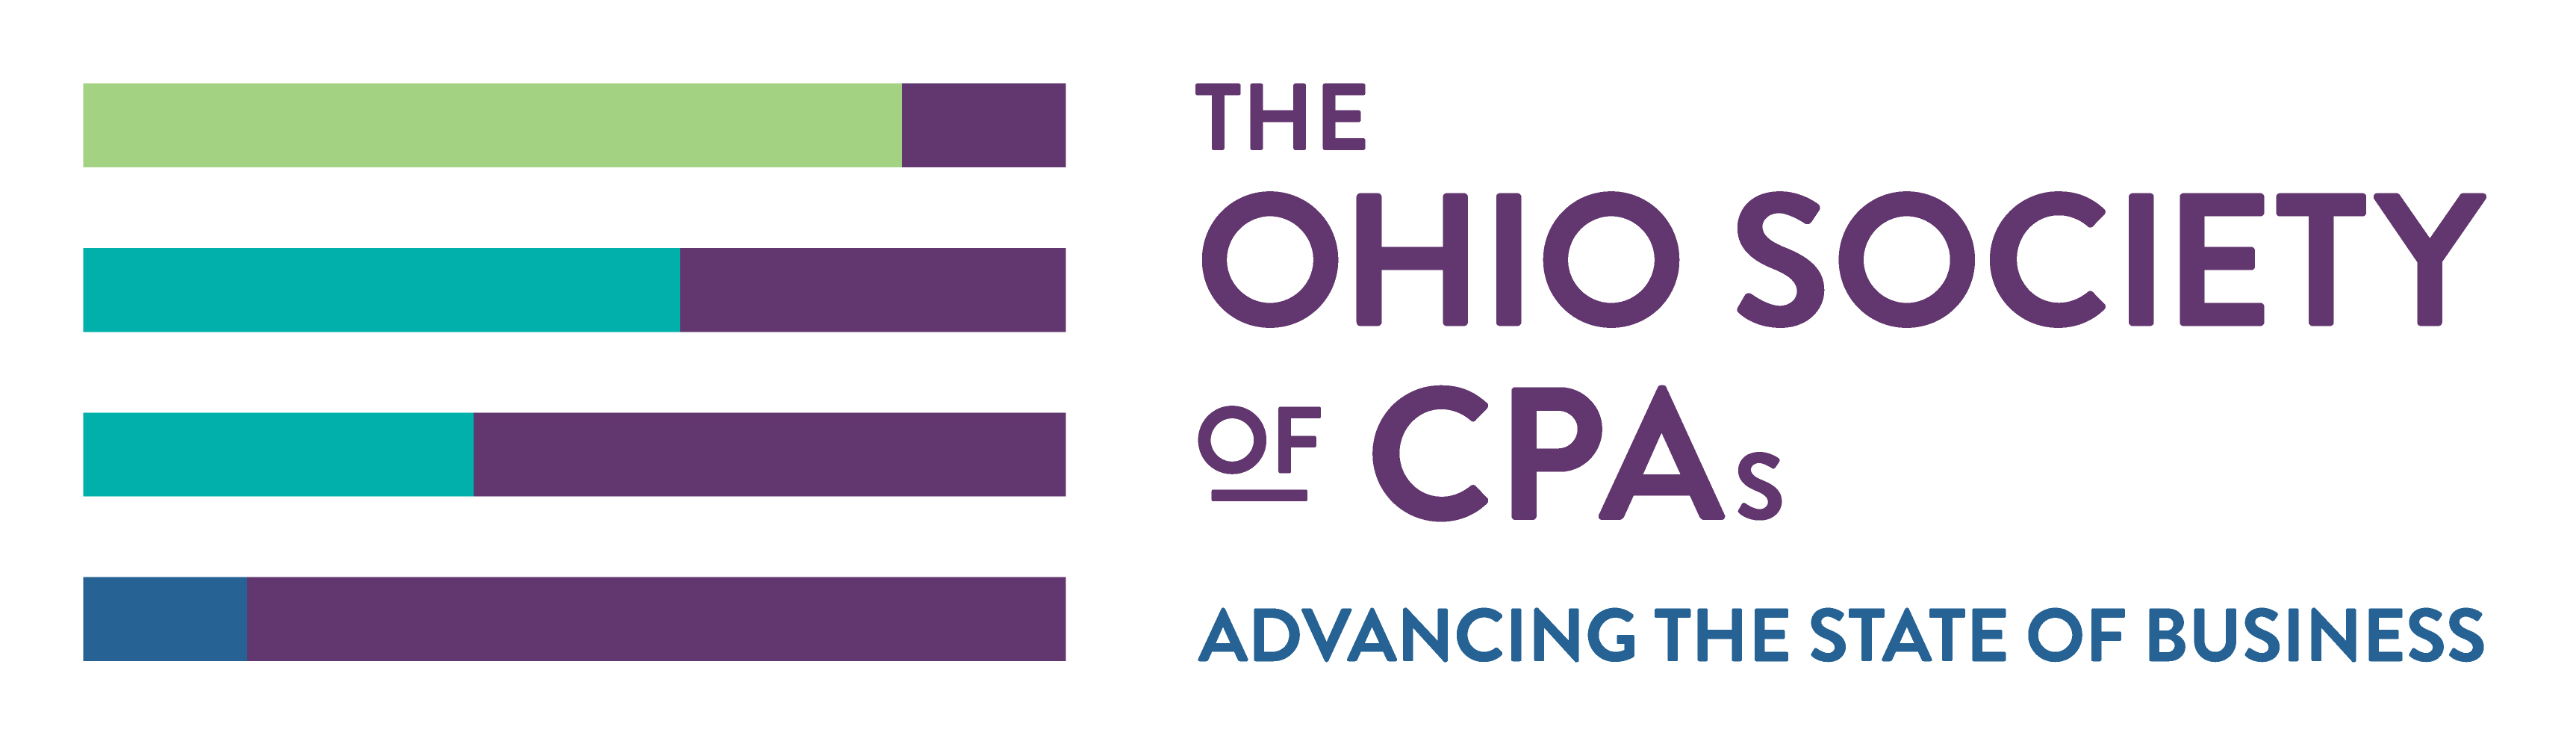 The Ohio Society of CPAs business logo